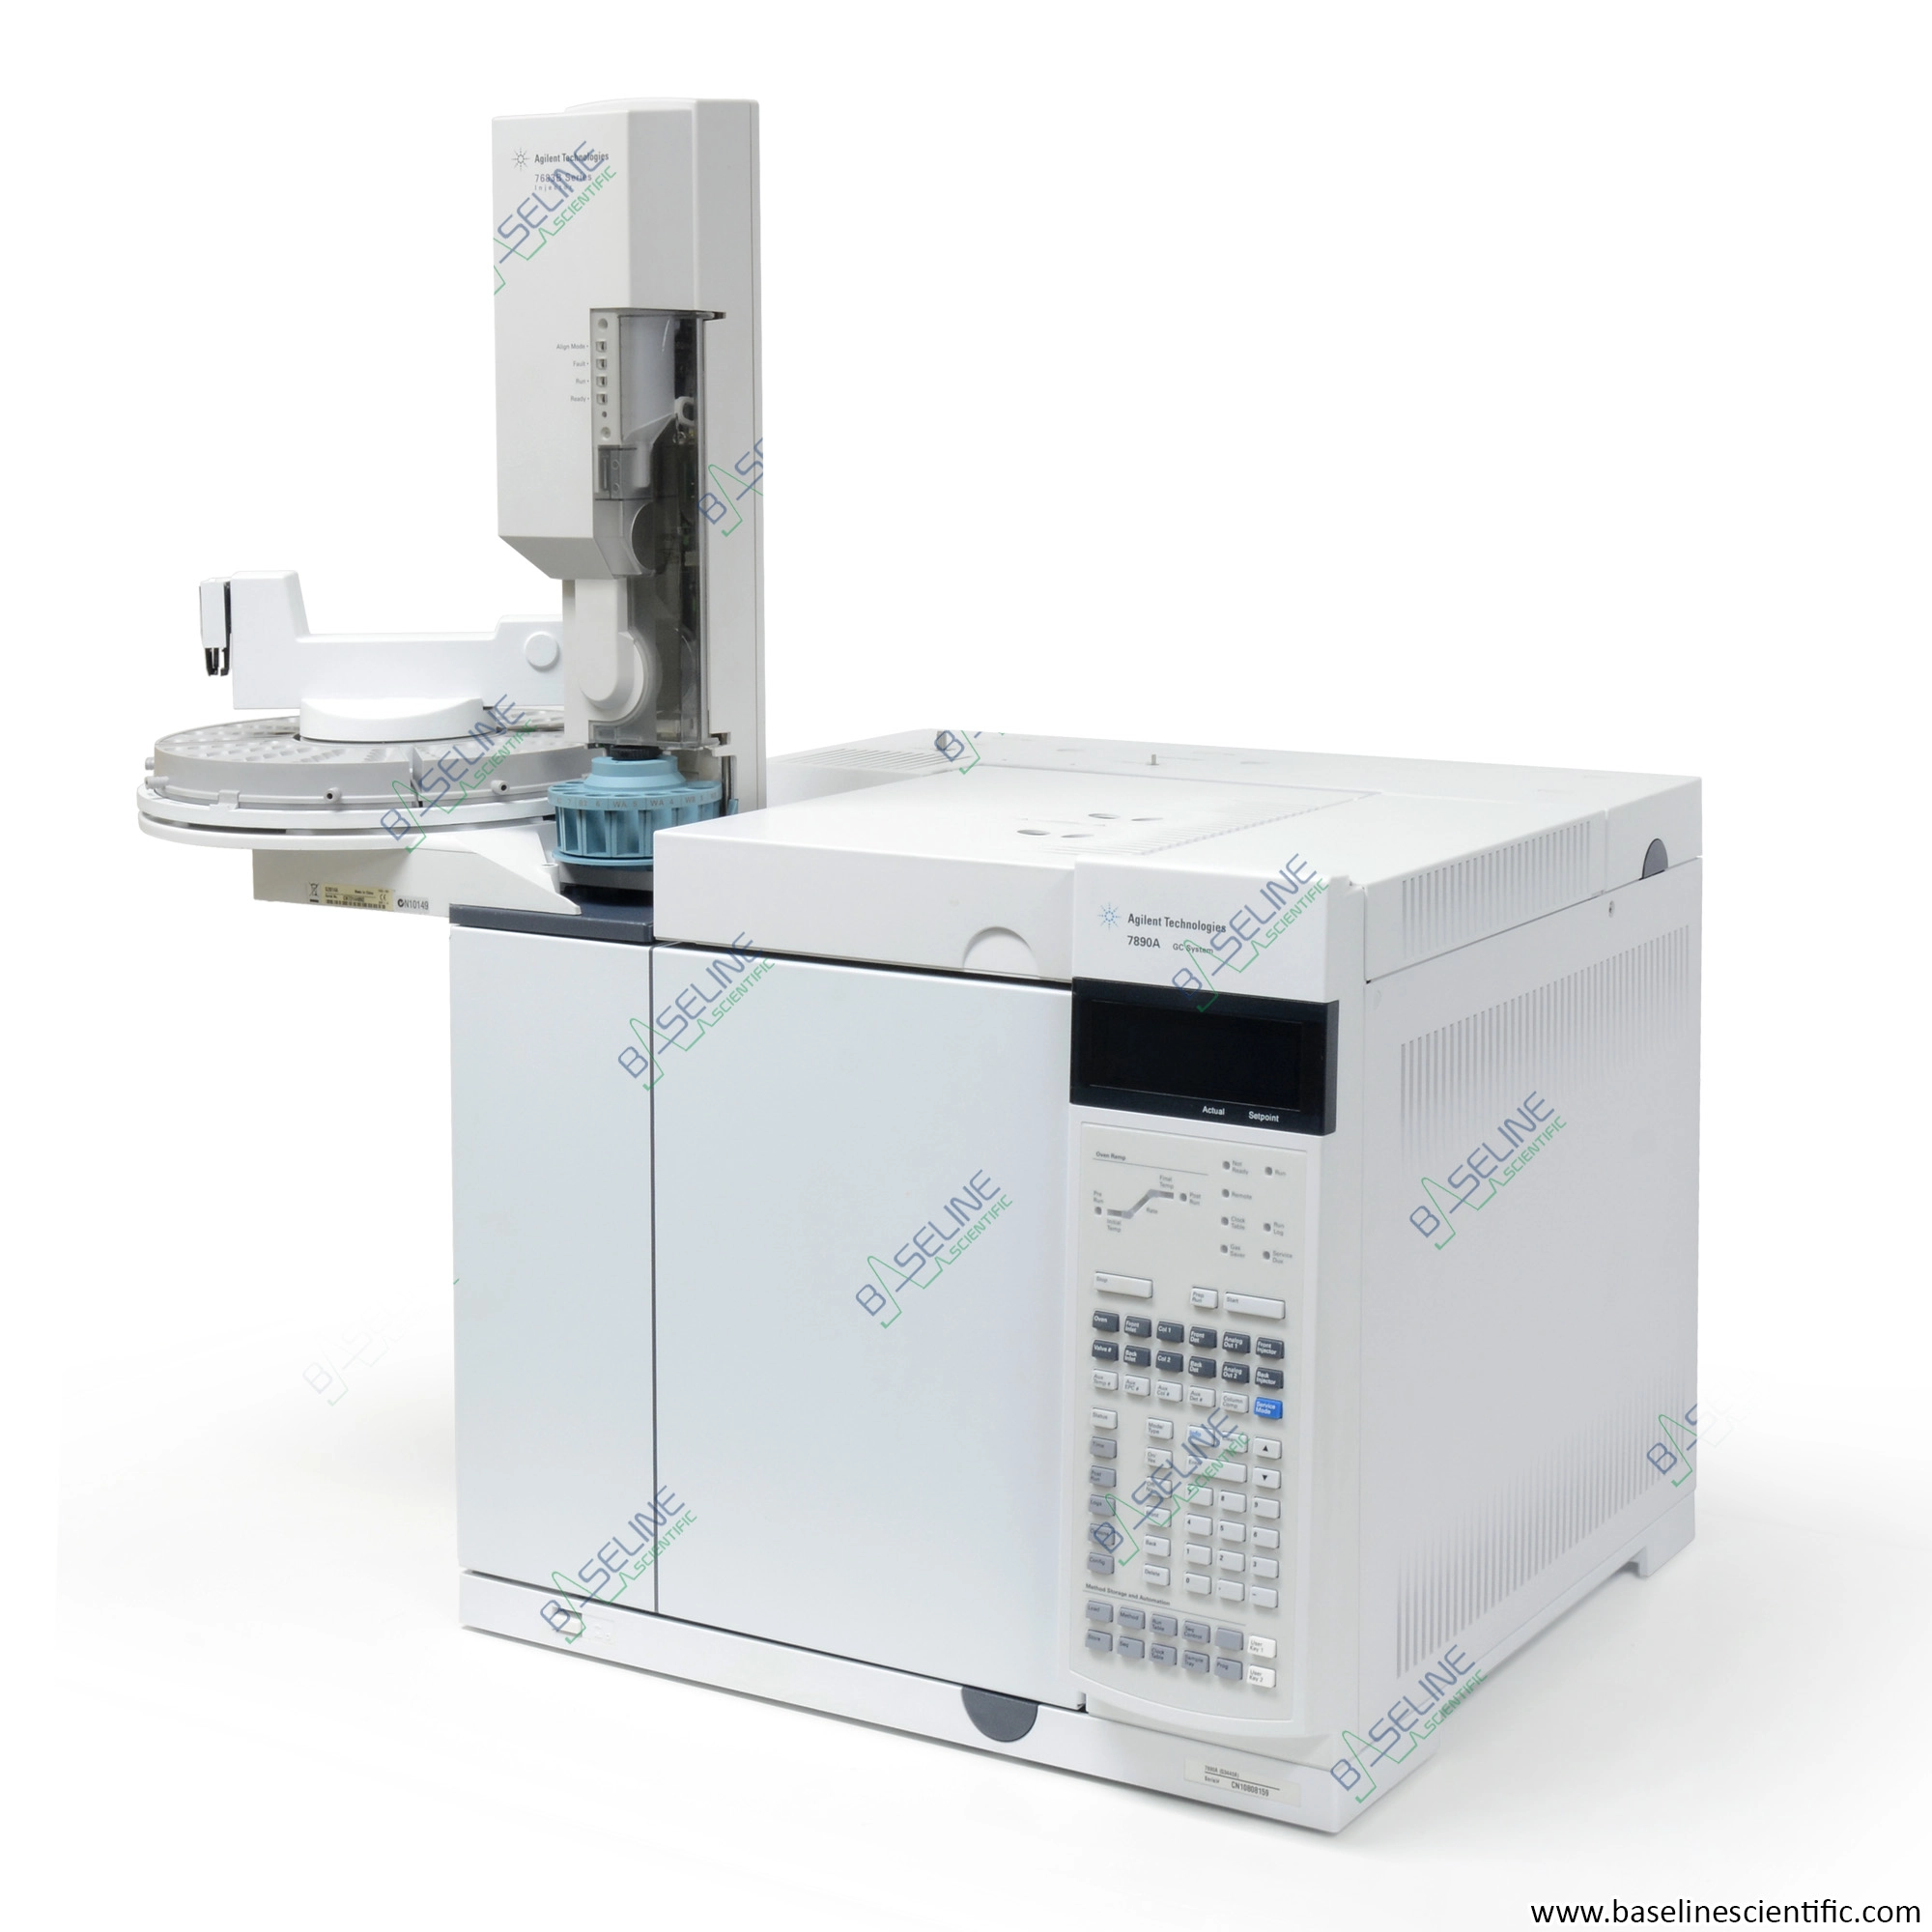 Refurbished Agilent 7890A Network Gas Chromatograph with 7683 Series Autosampler